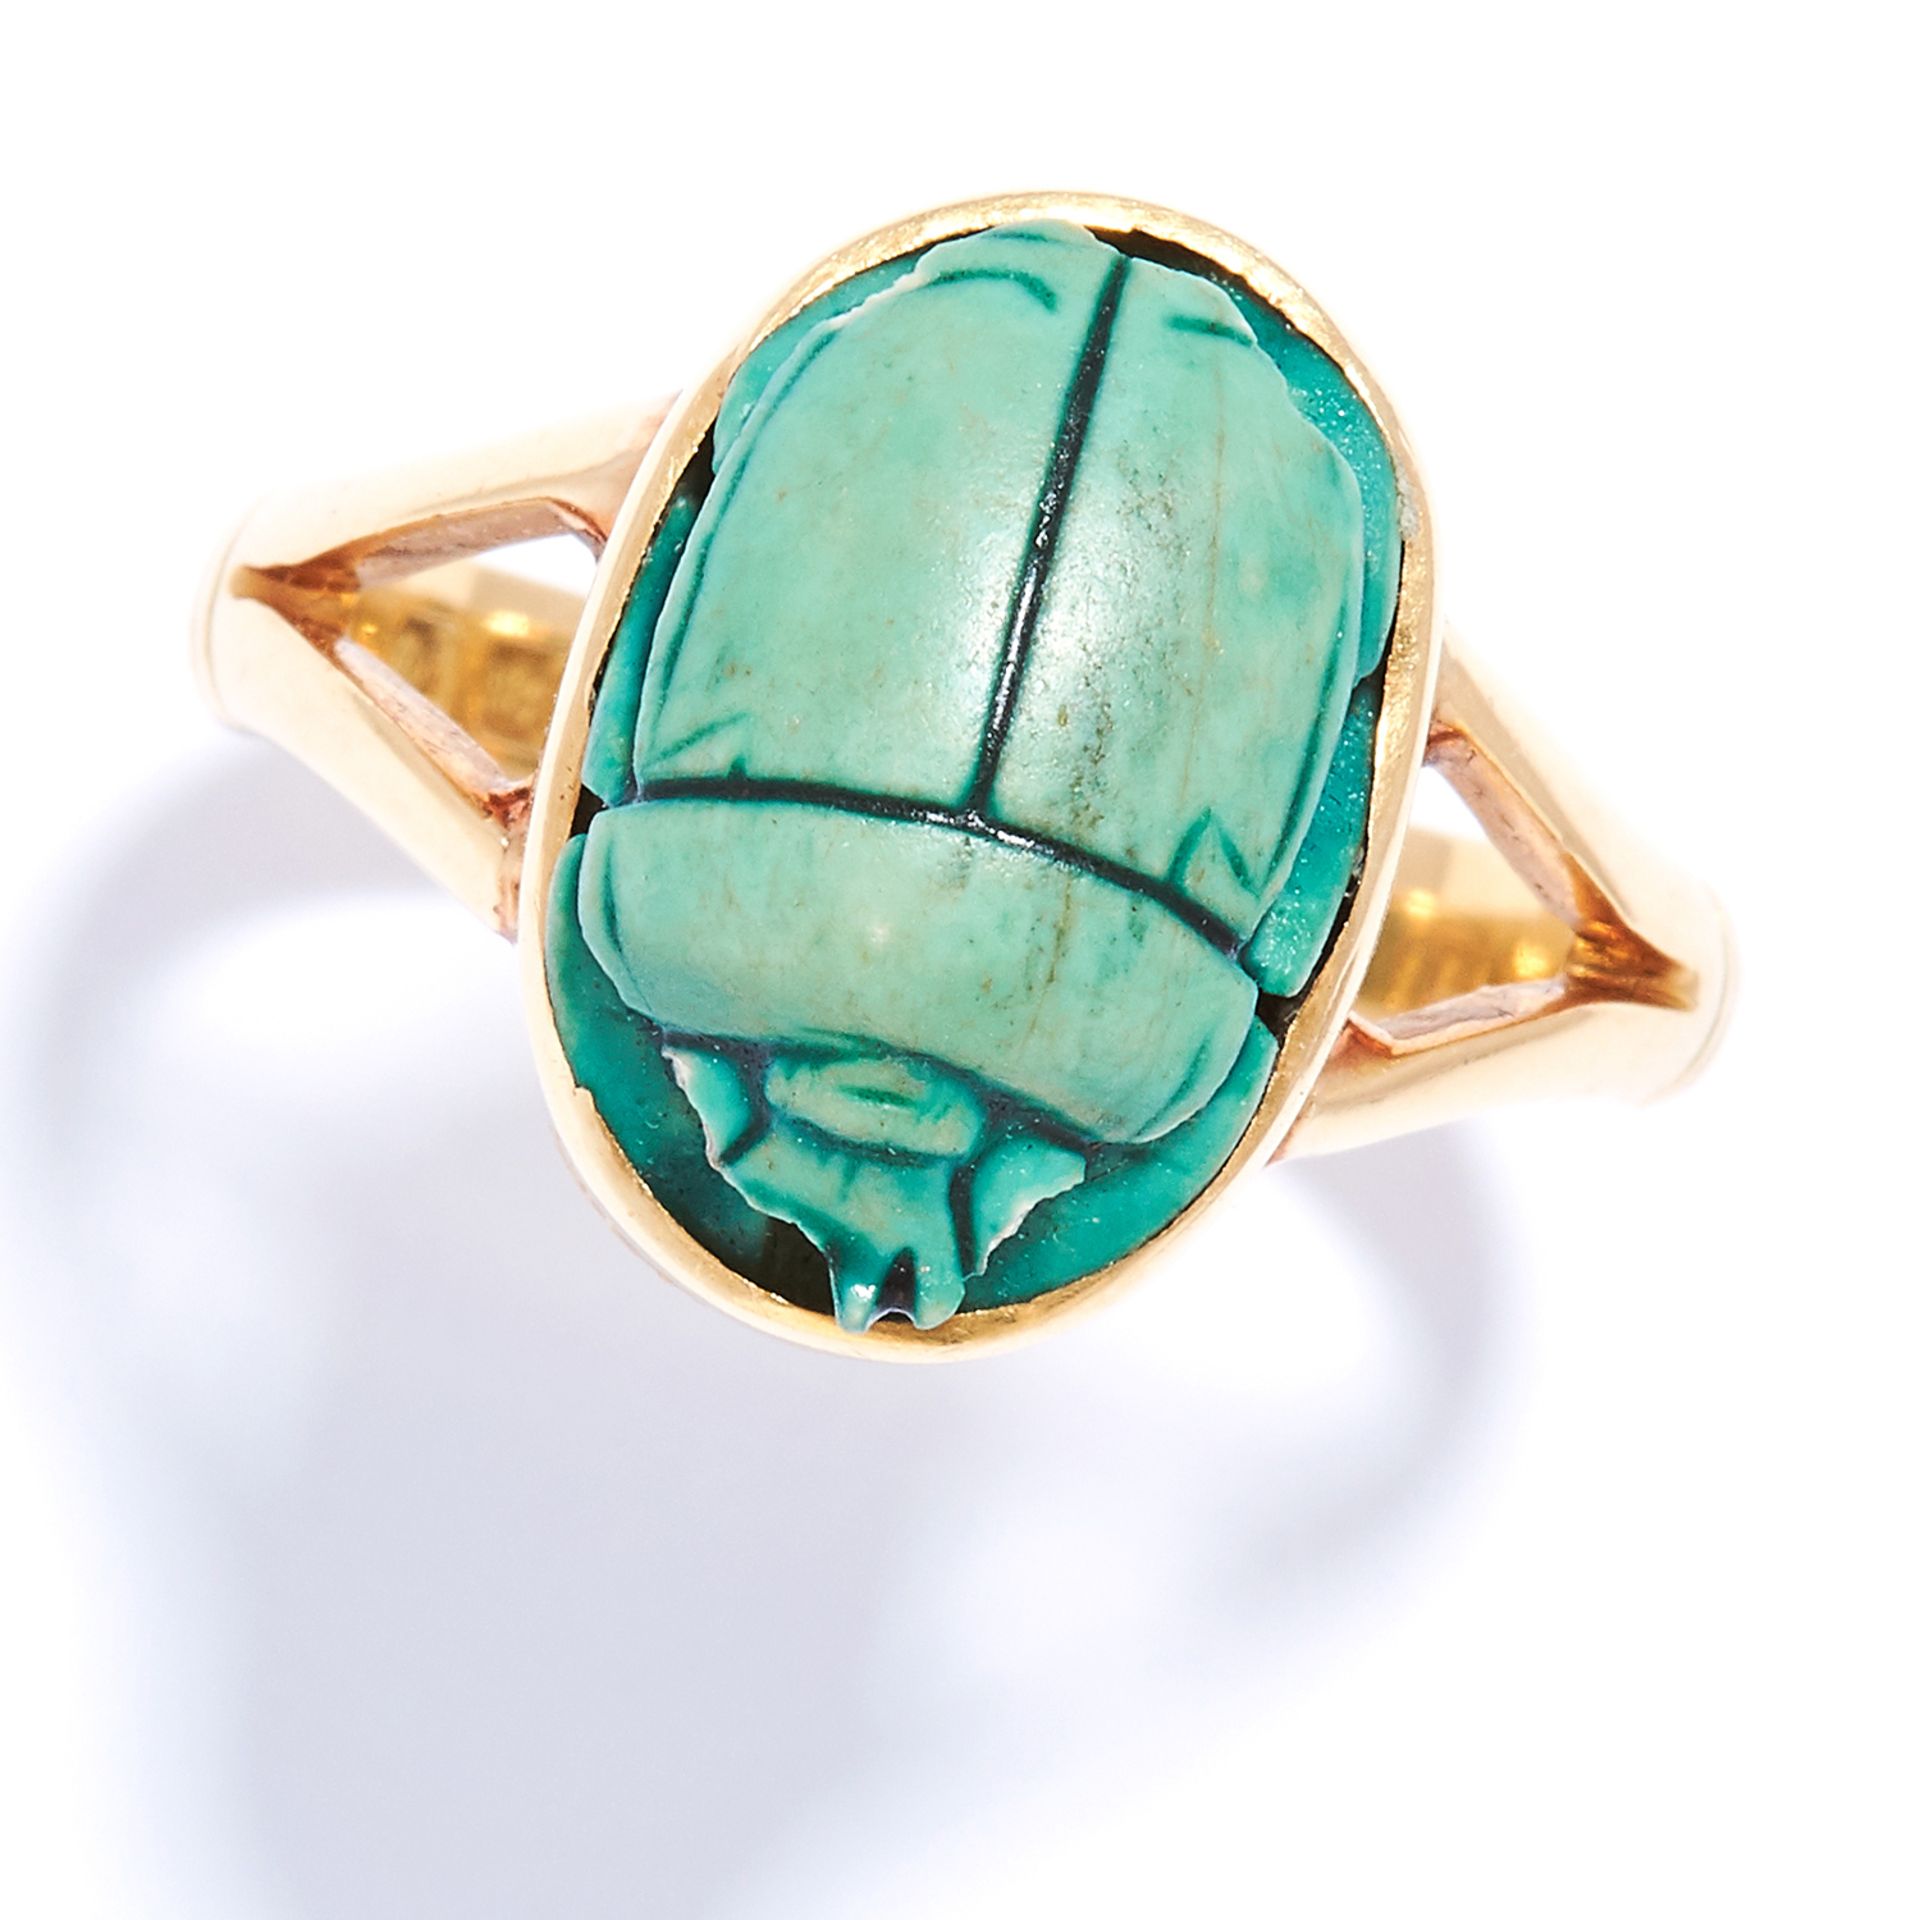 A CARVED SCARAB HARD STONE RING in 18ct yellow gold, set with a carved hard stone depicting a scarab